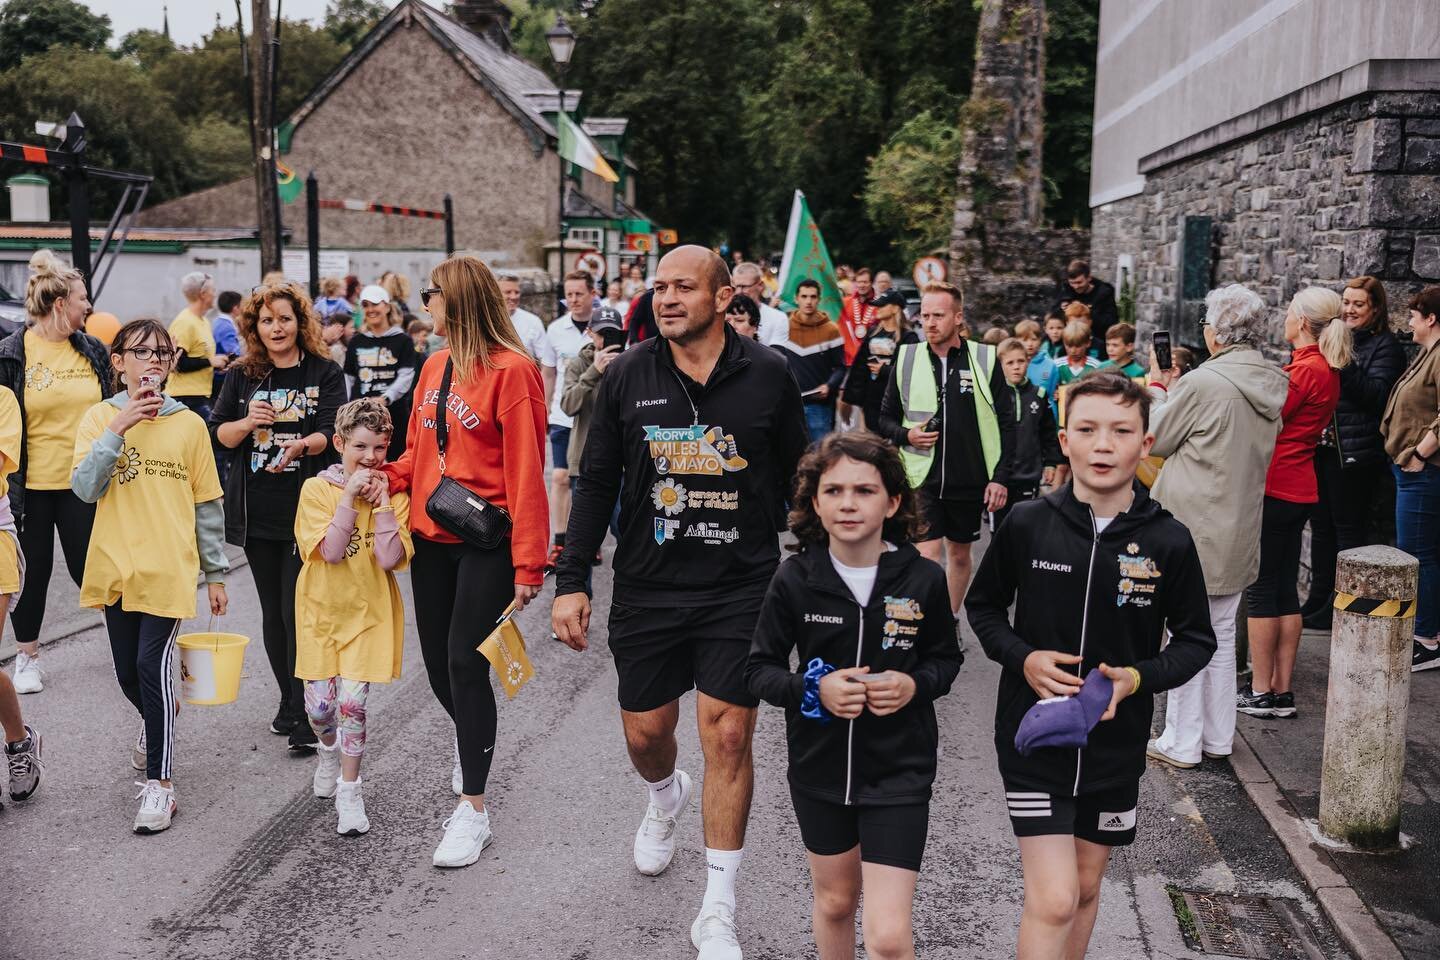 605 days ago to the day Rory and his family walked through Cong Co Mayo, completely the 180miles from Newcastle Co Down that would go on to raise over &euro;1million. 

Tonight the full film of the walk is going online, just in time to show everyone 